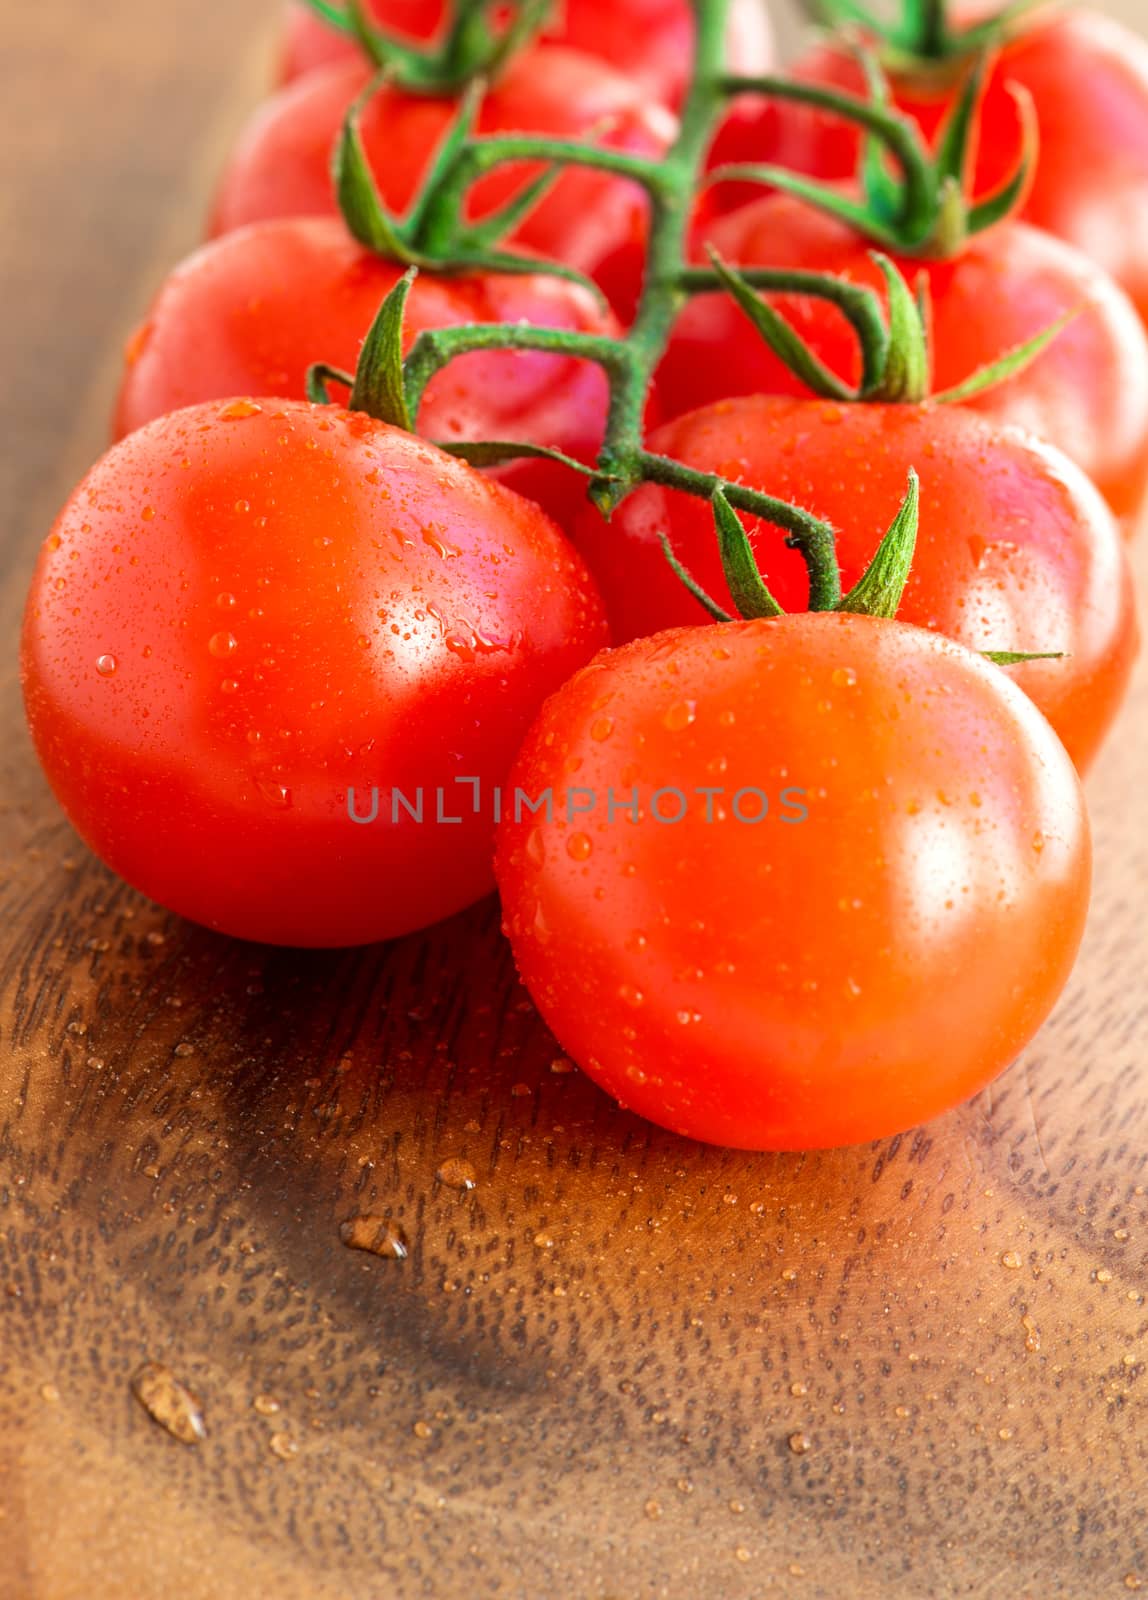 Cherry tomatoes on wooden background